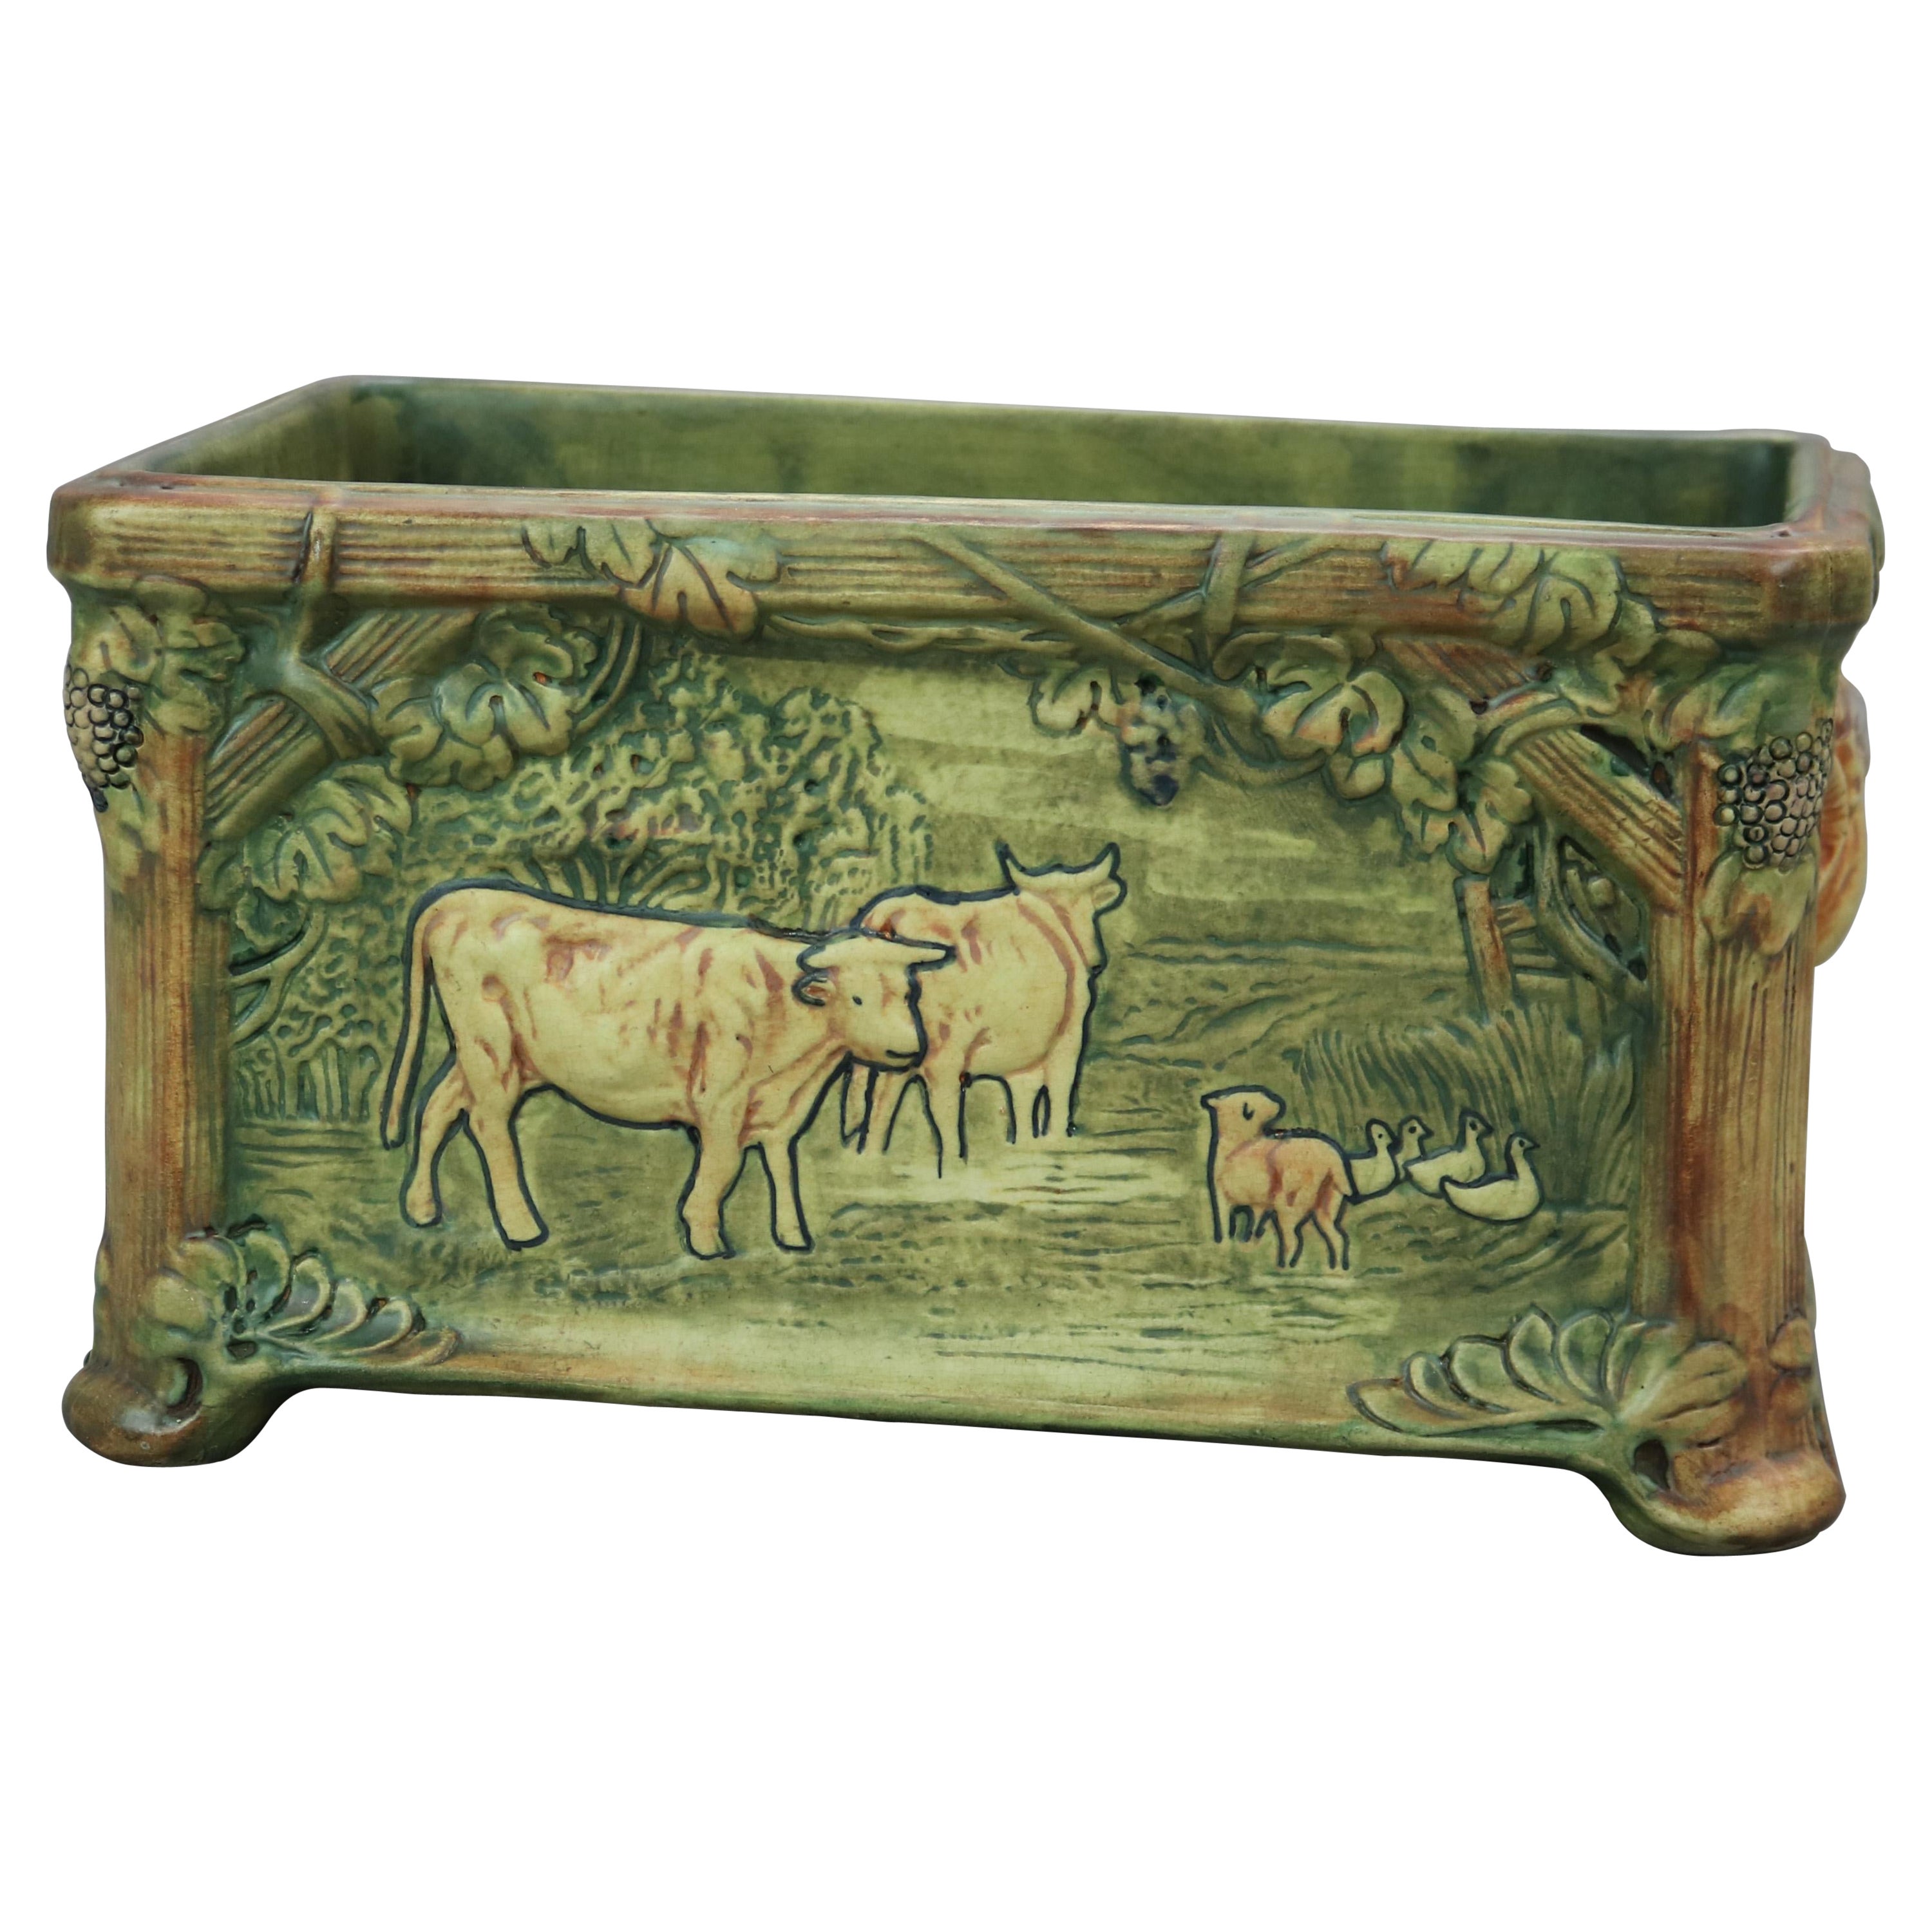 Antique Weller Art Pottery Planter Window Box Form with Cows c1930